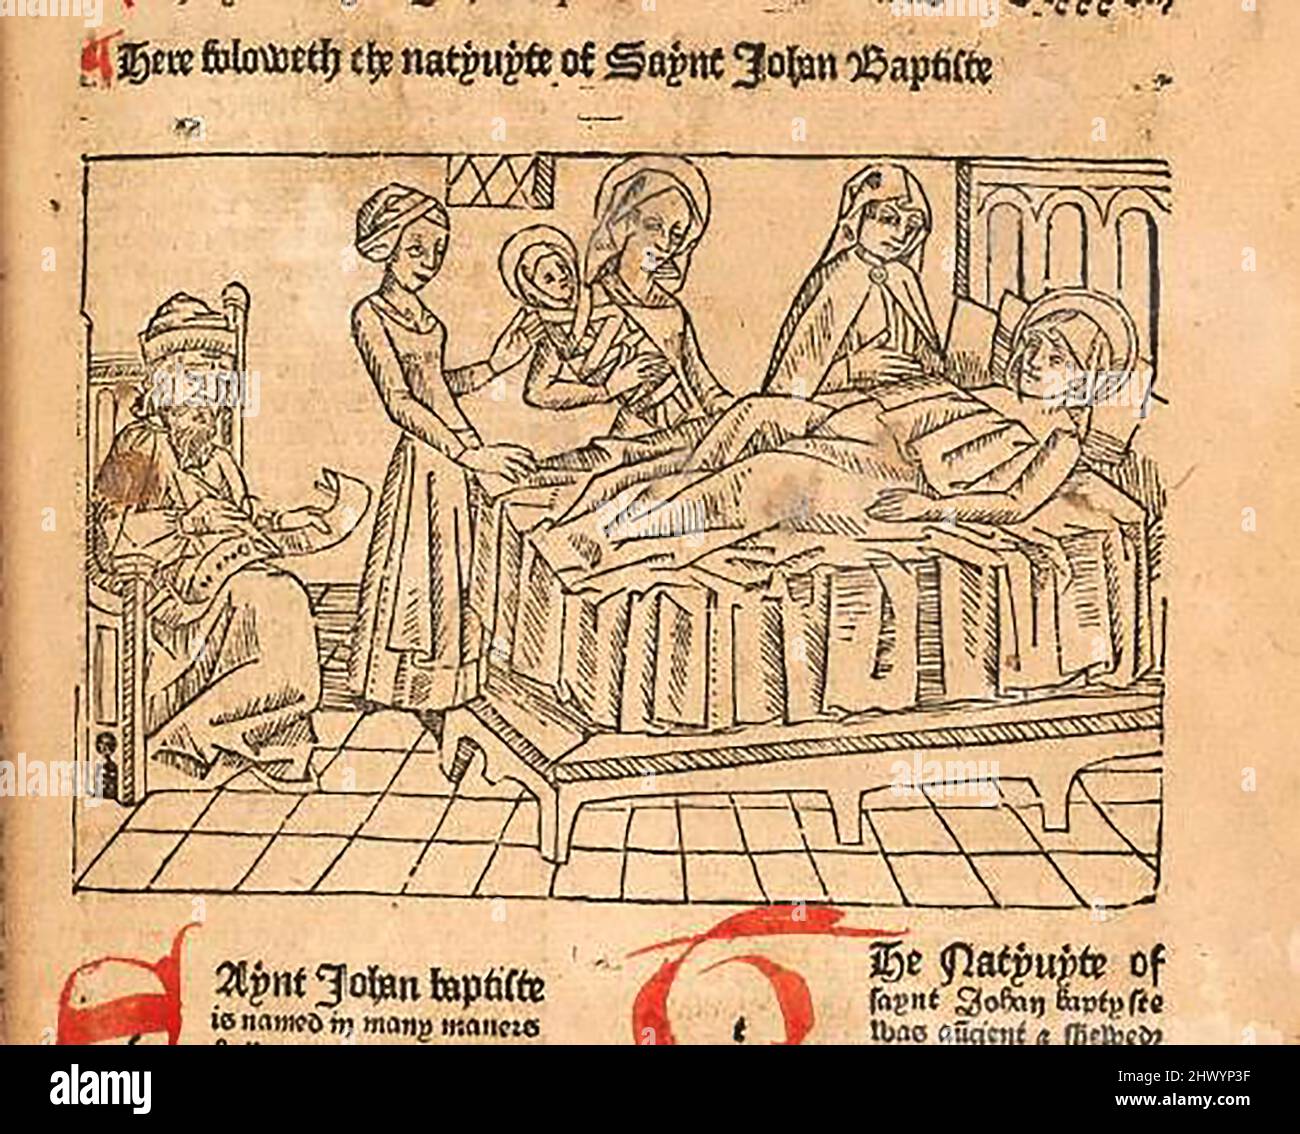 15th century woodcut showing the nativity of St John the Baptist, printed by William Caxton ( 1422-1491/92) in his translation of  'The Golden Legend' or  'Thus endeth the legende named in Latyn legenda aurea that is to saye in Englysshe the golden legende' by Jacobus, de Voragine, (Circa 1229-1298). Stock Photo